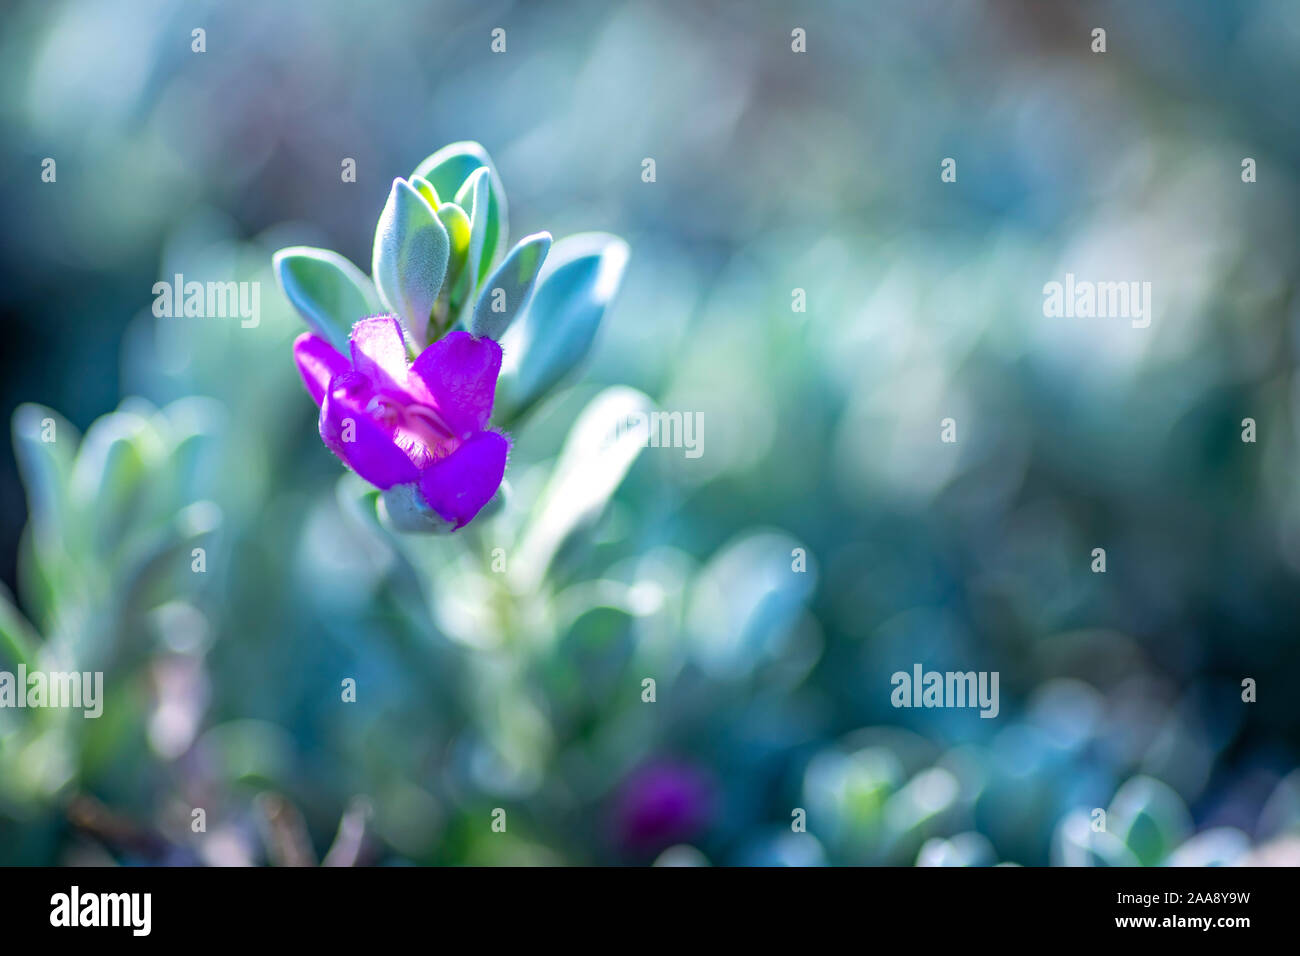 Pink delicate Leucophyllum frutescens flower close-up on a blurred background Stock Photo